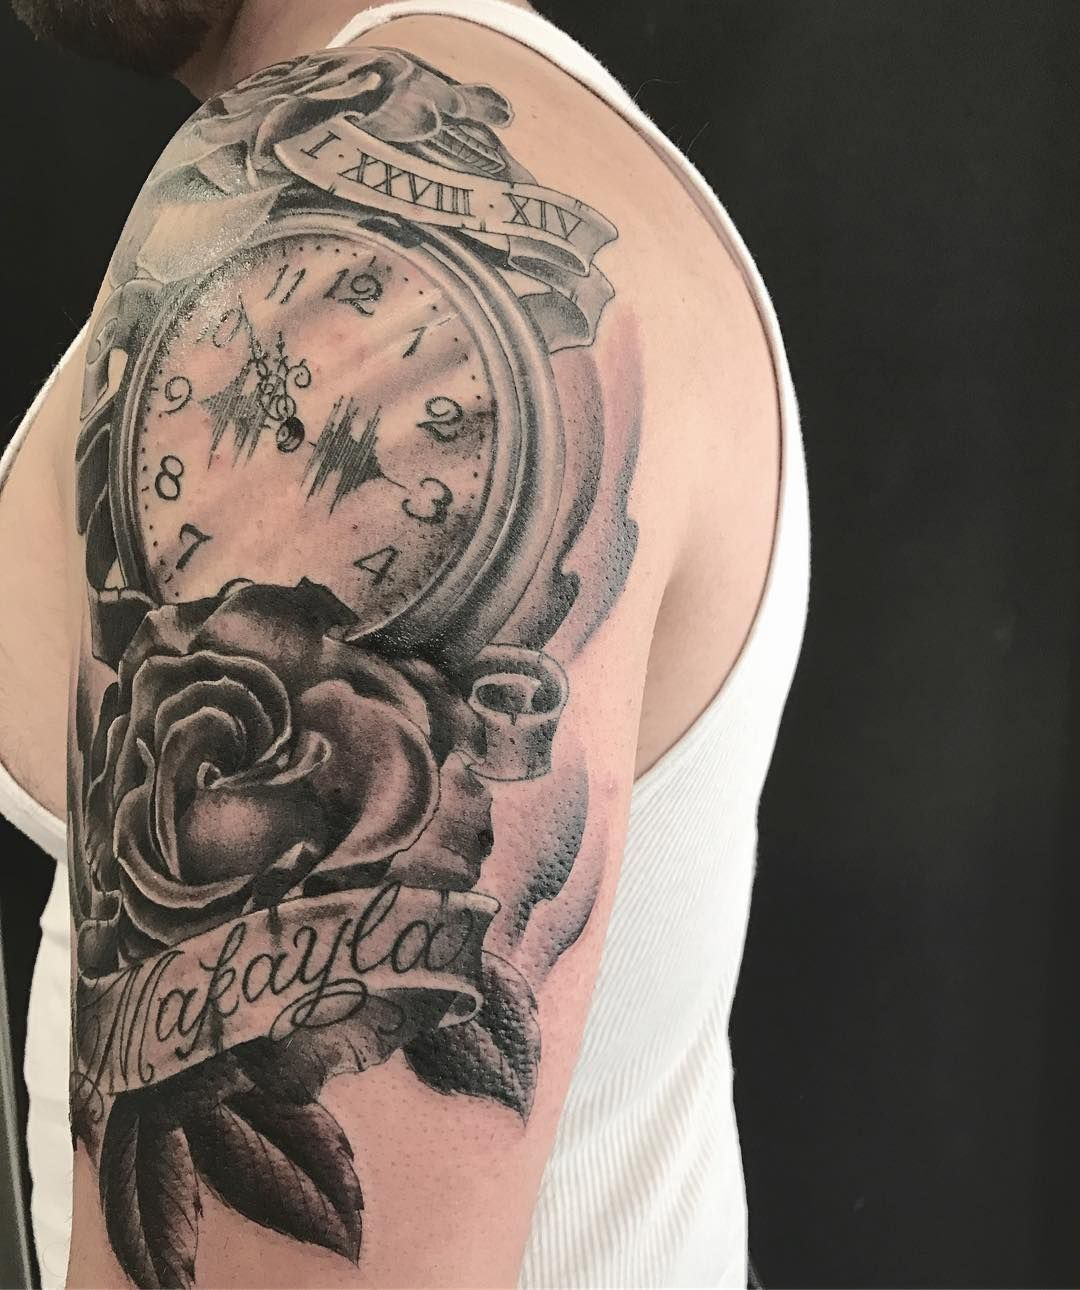 Watch And Roses Tattoo On A Shoulder With His Daughter Name inside dimensions 1080 X 1290